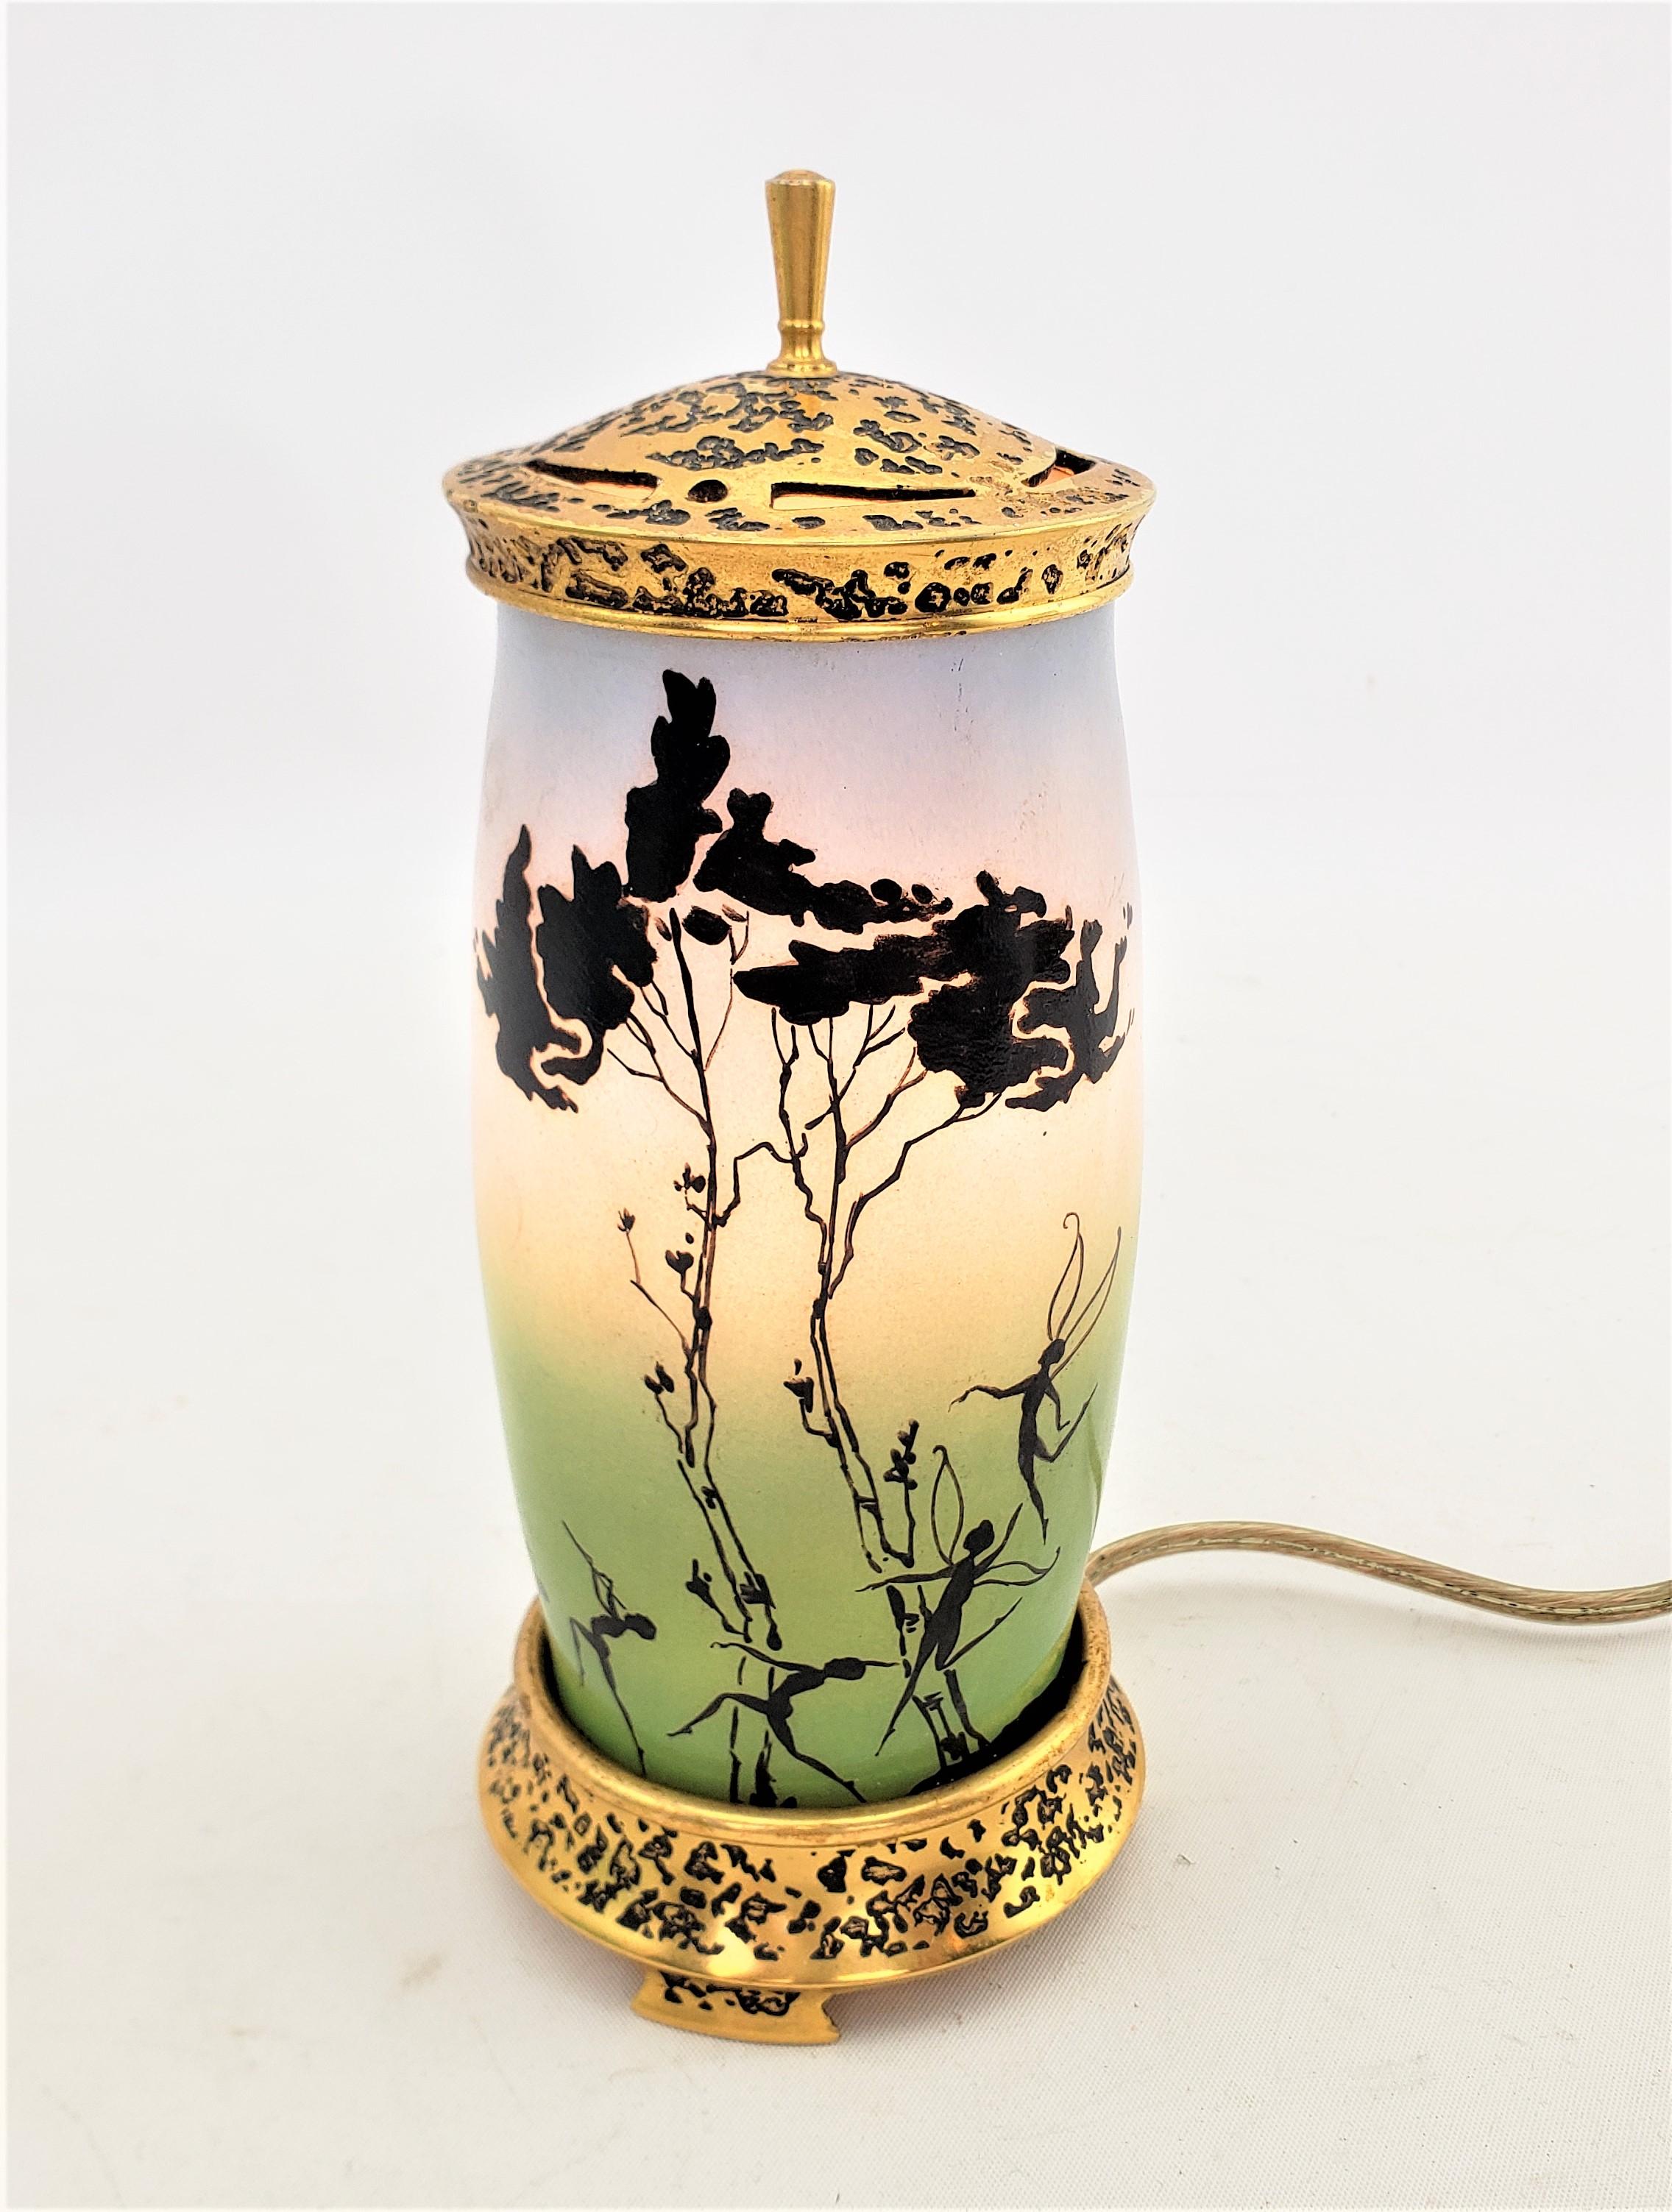 This perfume lamp was made by the well known Devilbiss company of the United States, and assembled in Canada and dates to approximately 1920 and done in the period Art Deco style. The lamp is composed of a gilt bronze top and base with etched and